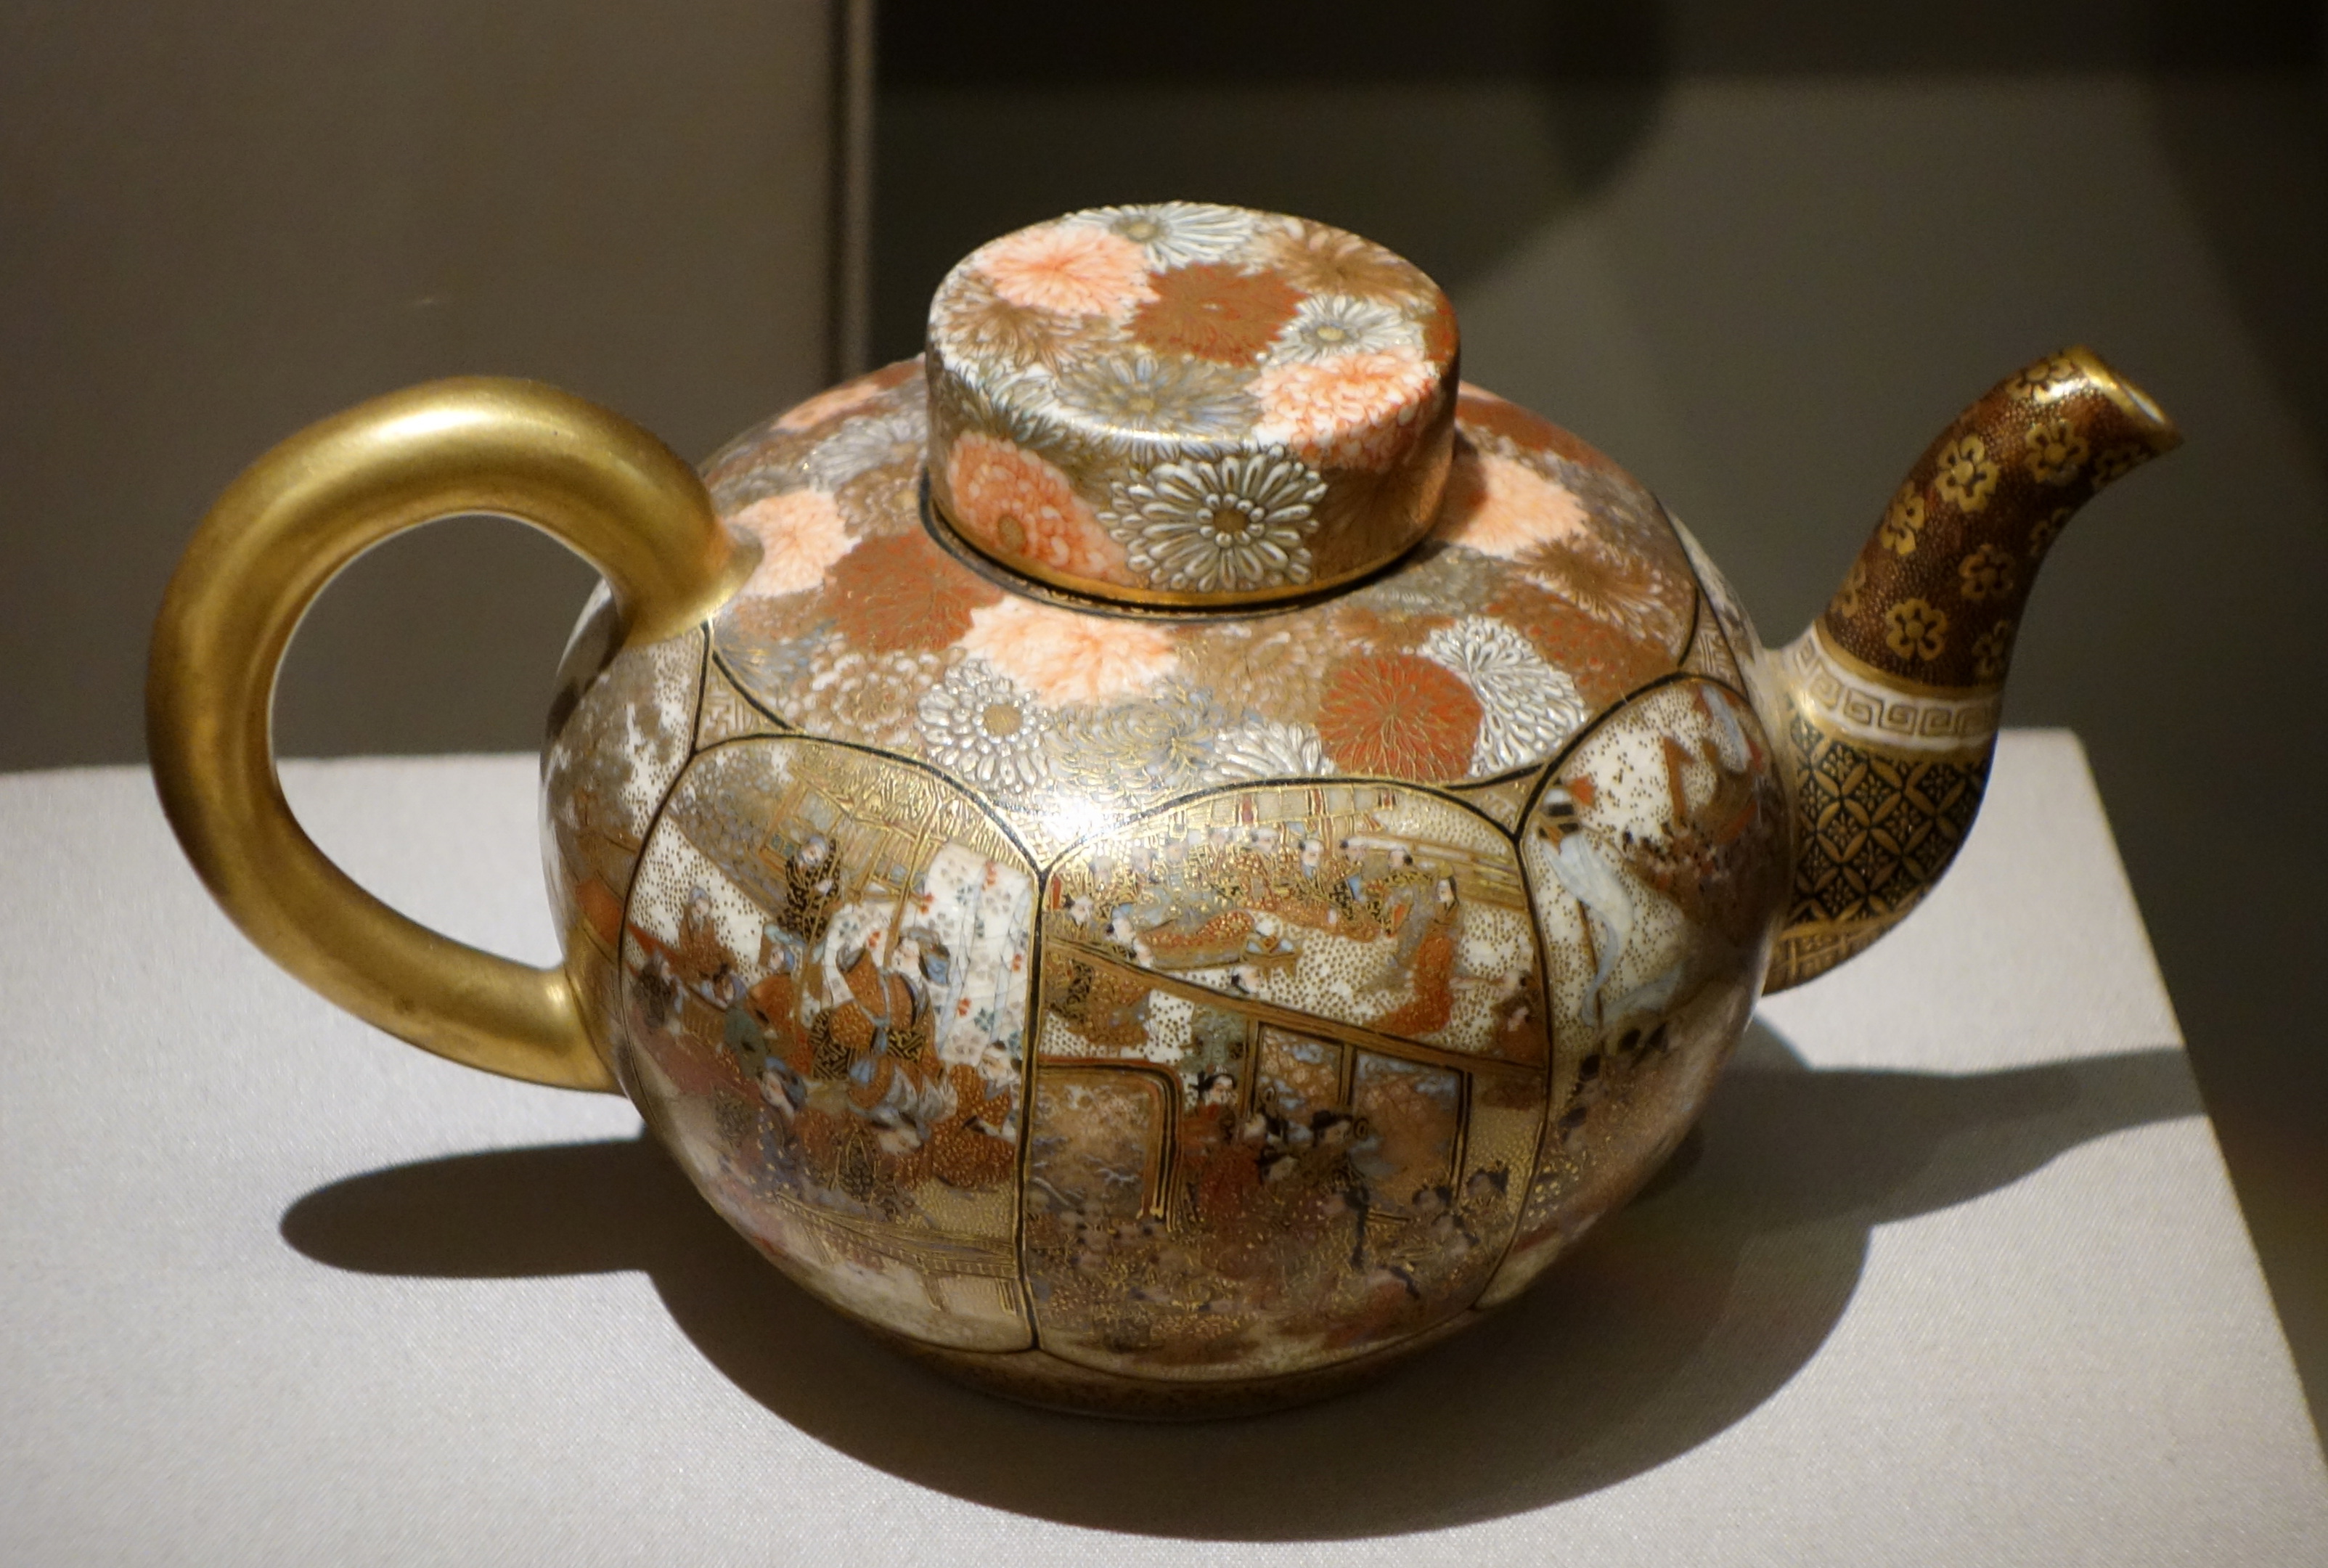 File:Teapot, Japan (Kyoto), Seikozan workshop, undated, earthenware with  overglaze and gold - Chazen Museum of Art  - Wikimedia Commons